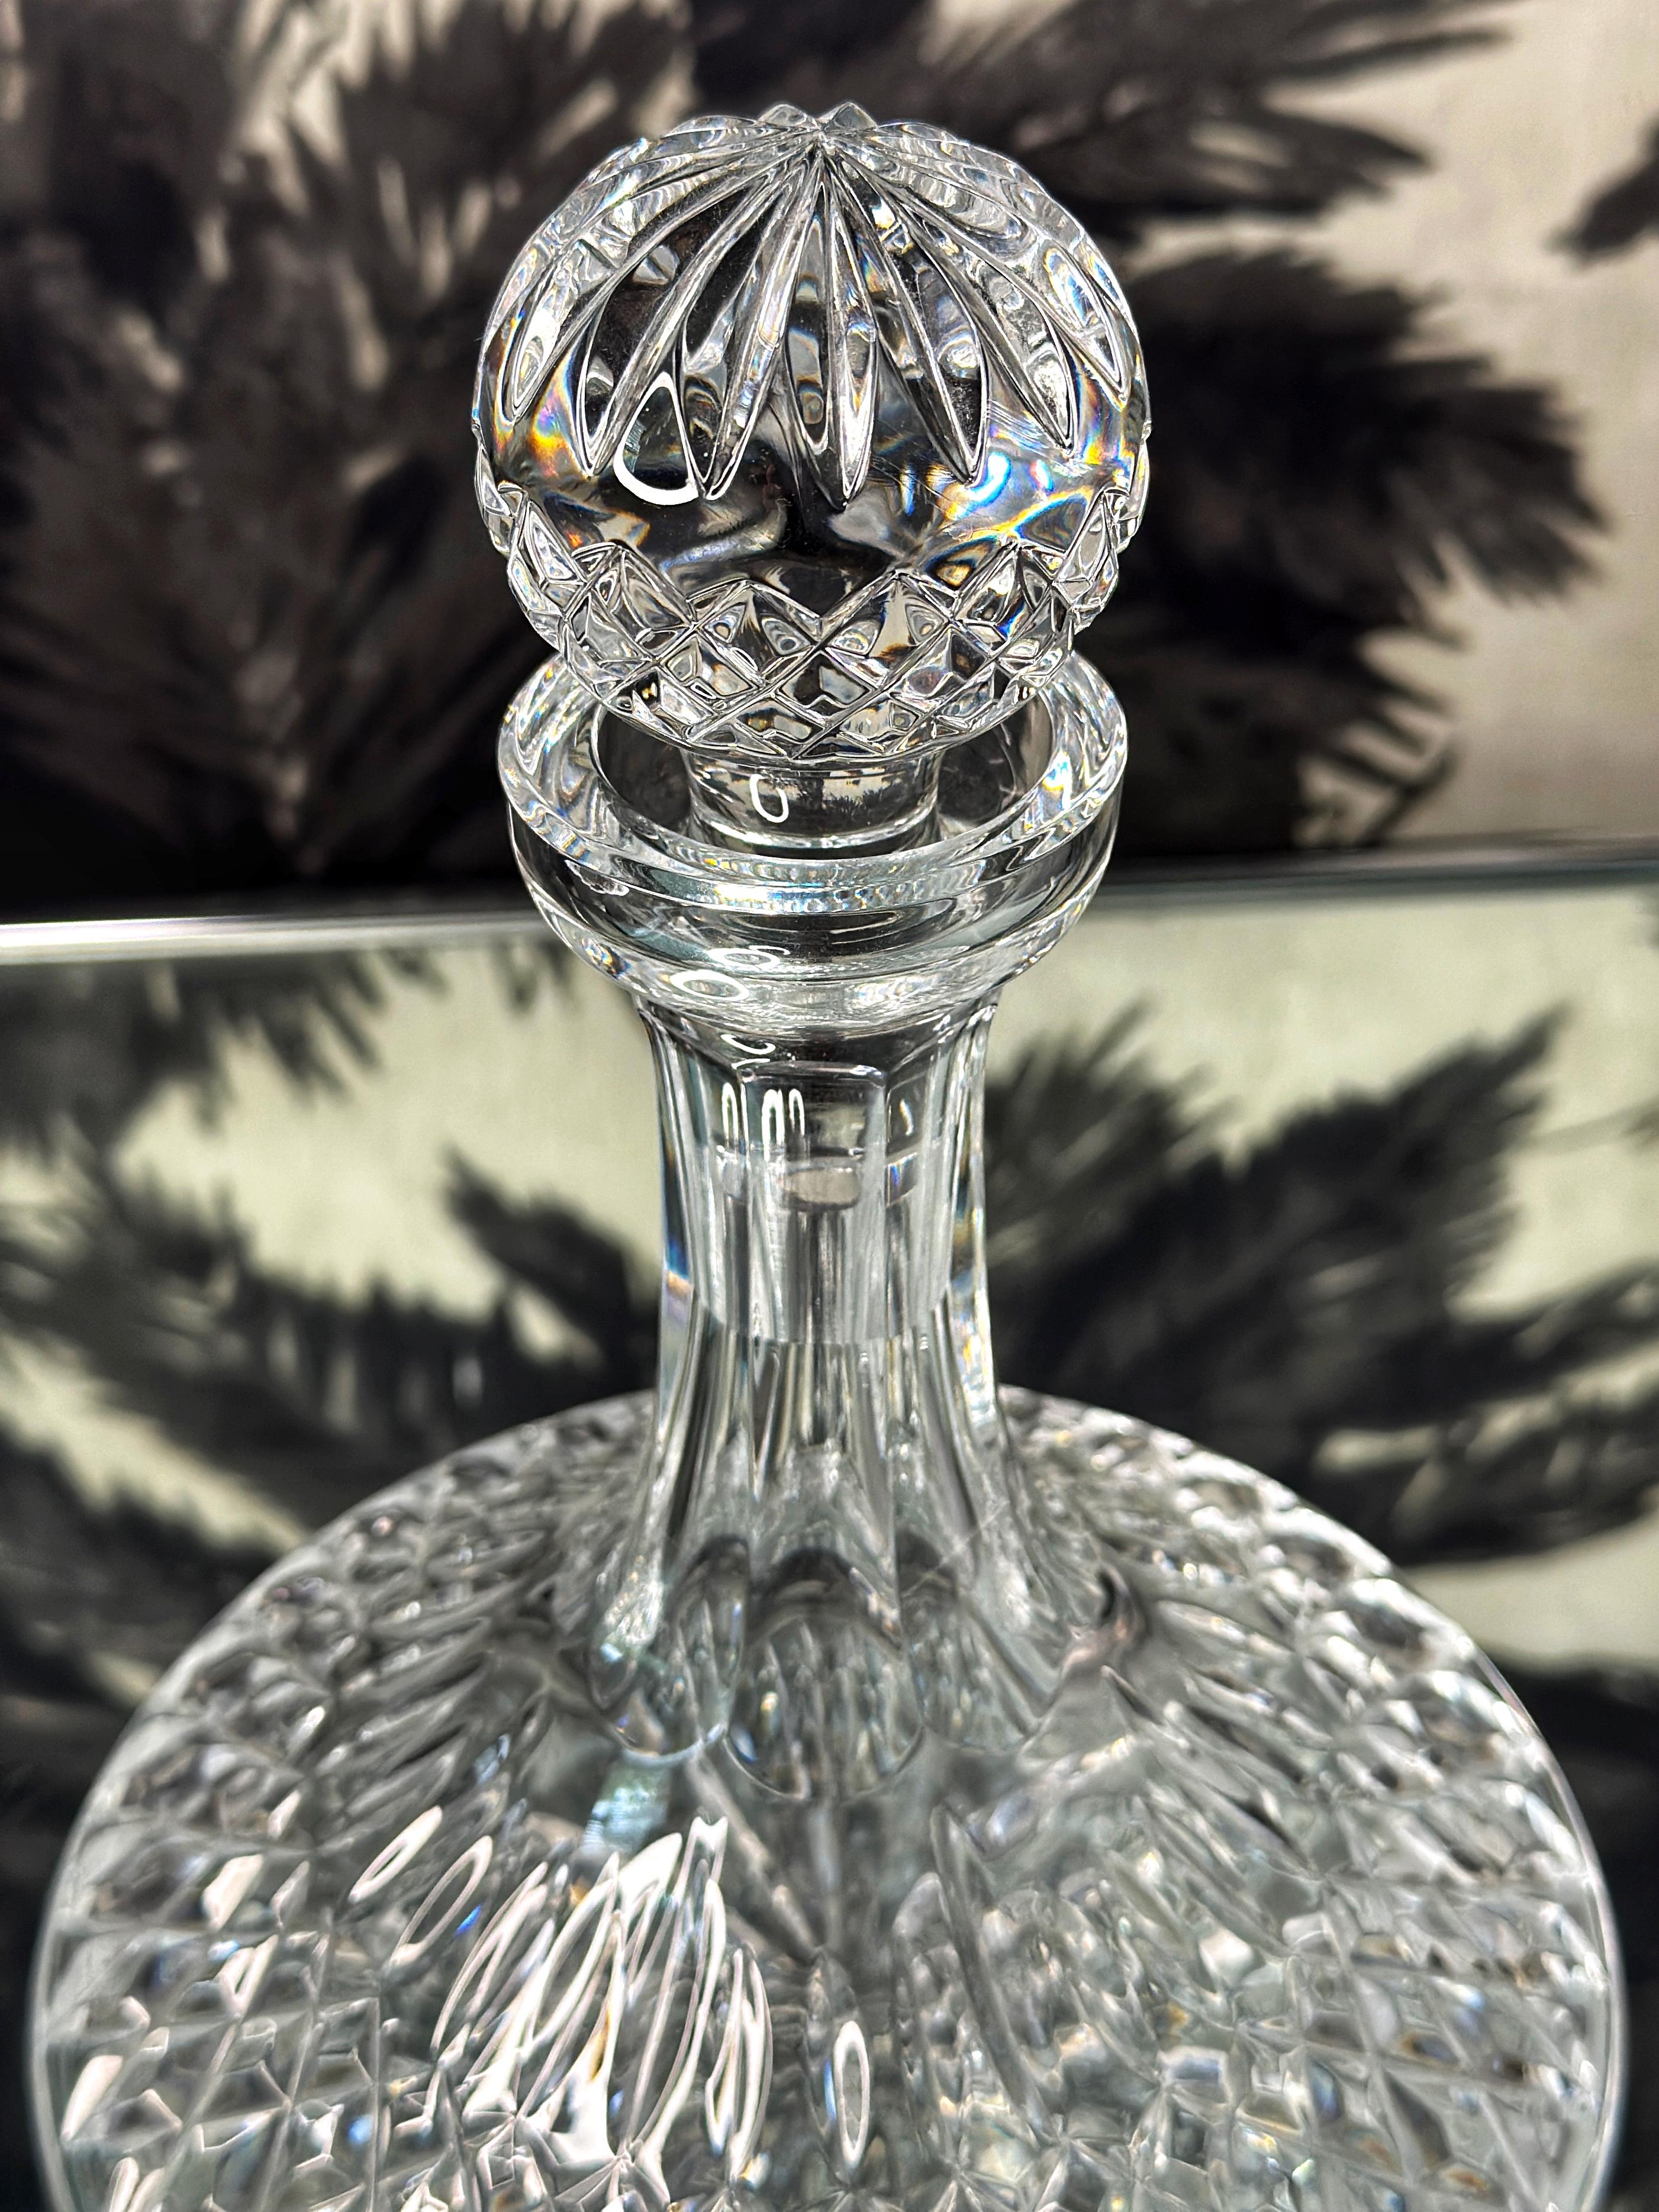 Regency Vintage Waterford Crystal Ships Decanter with Etched Diamond Cuts, c. 1970's